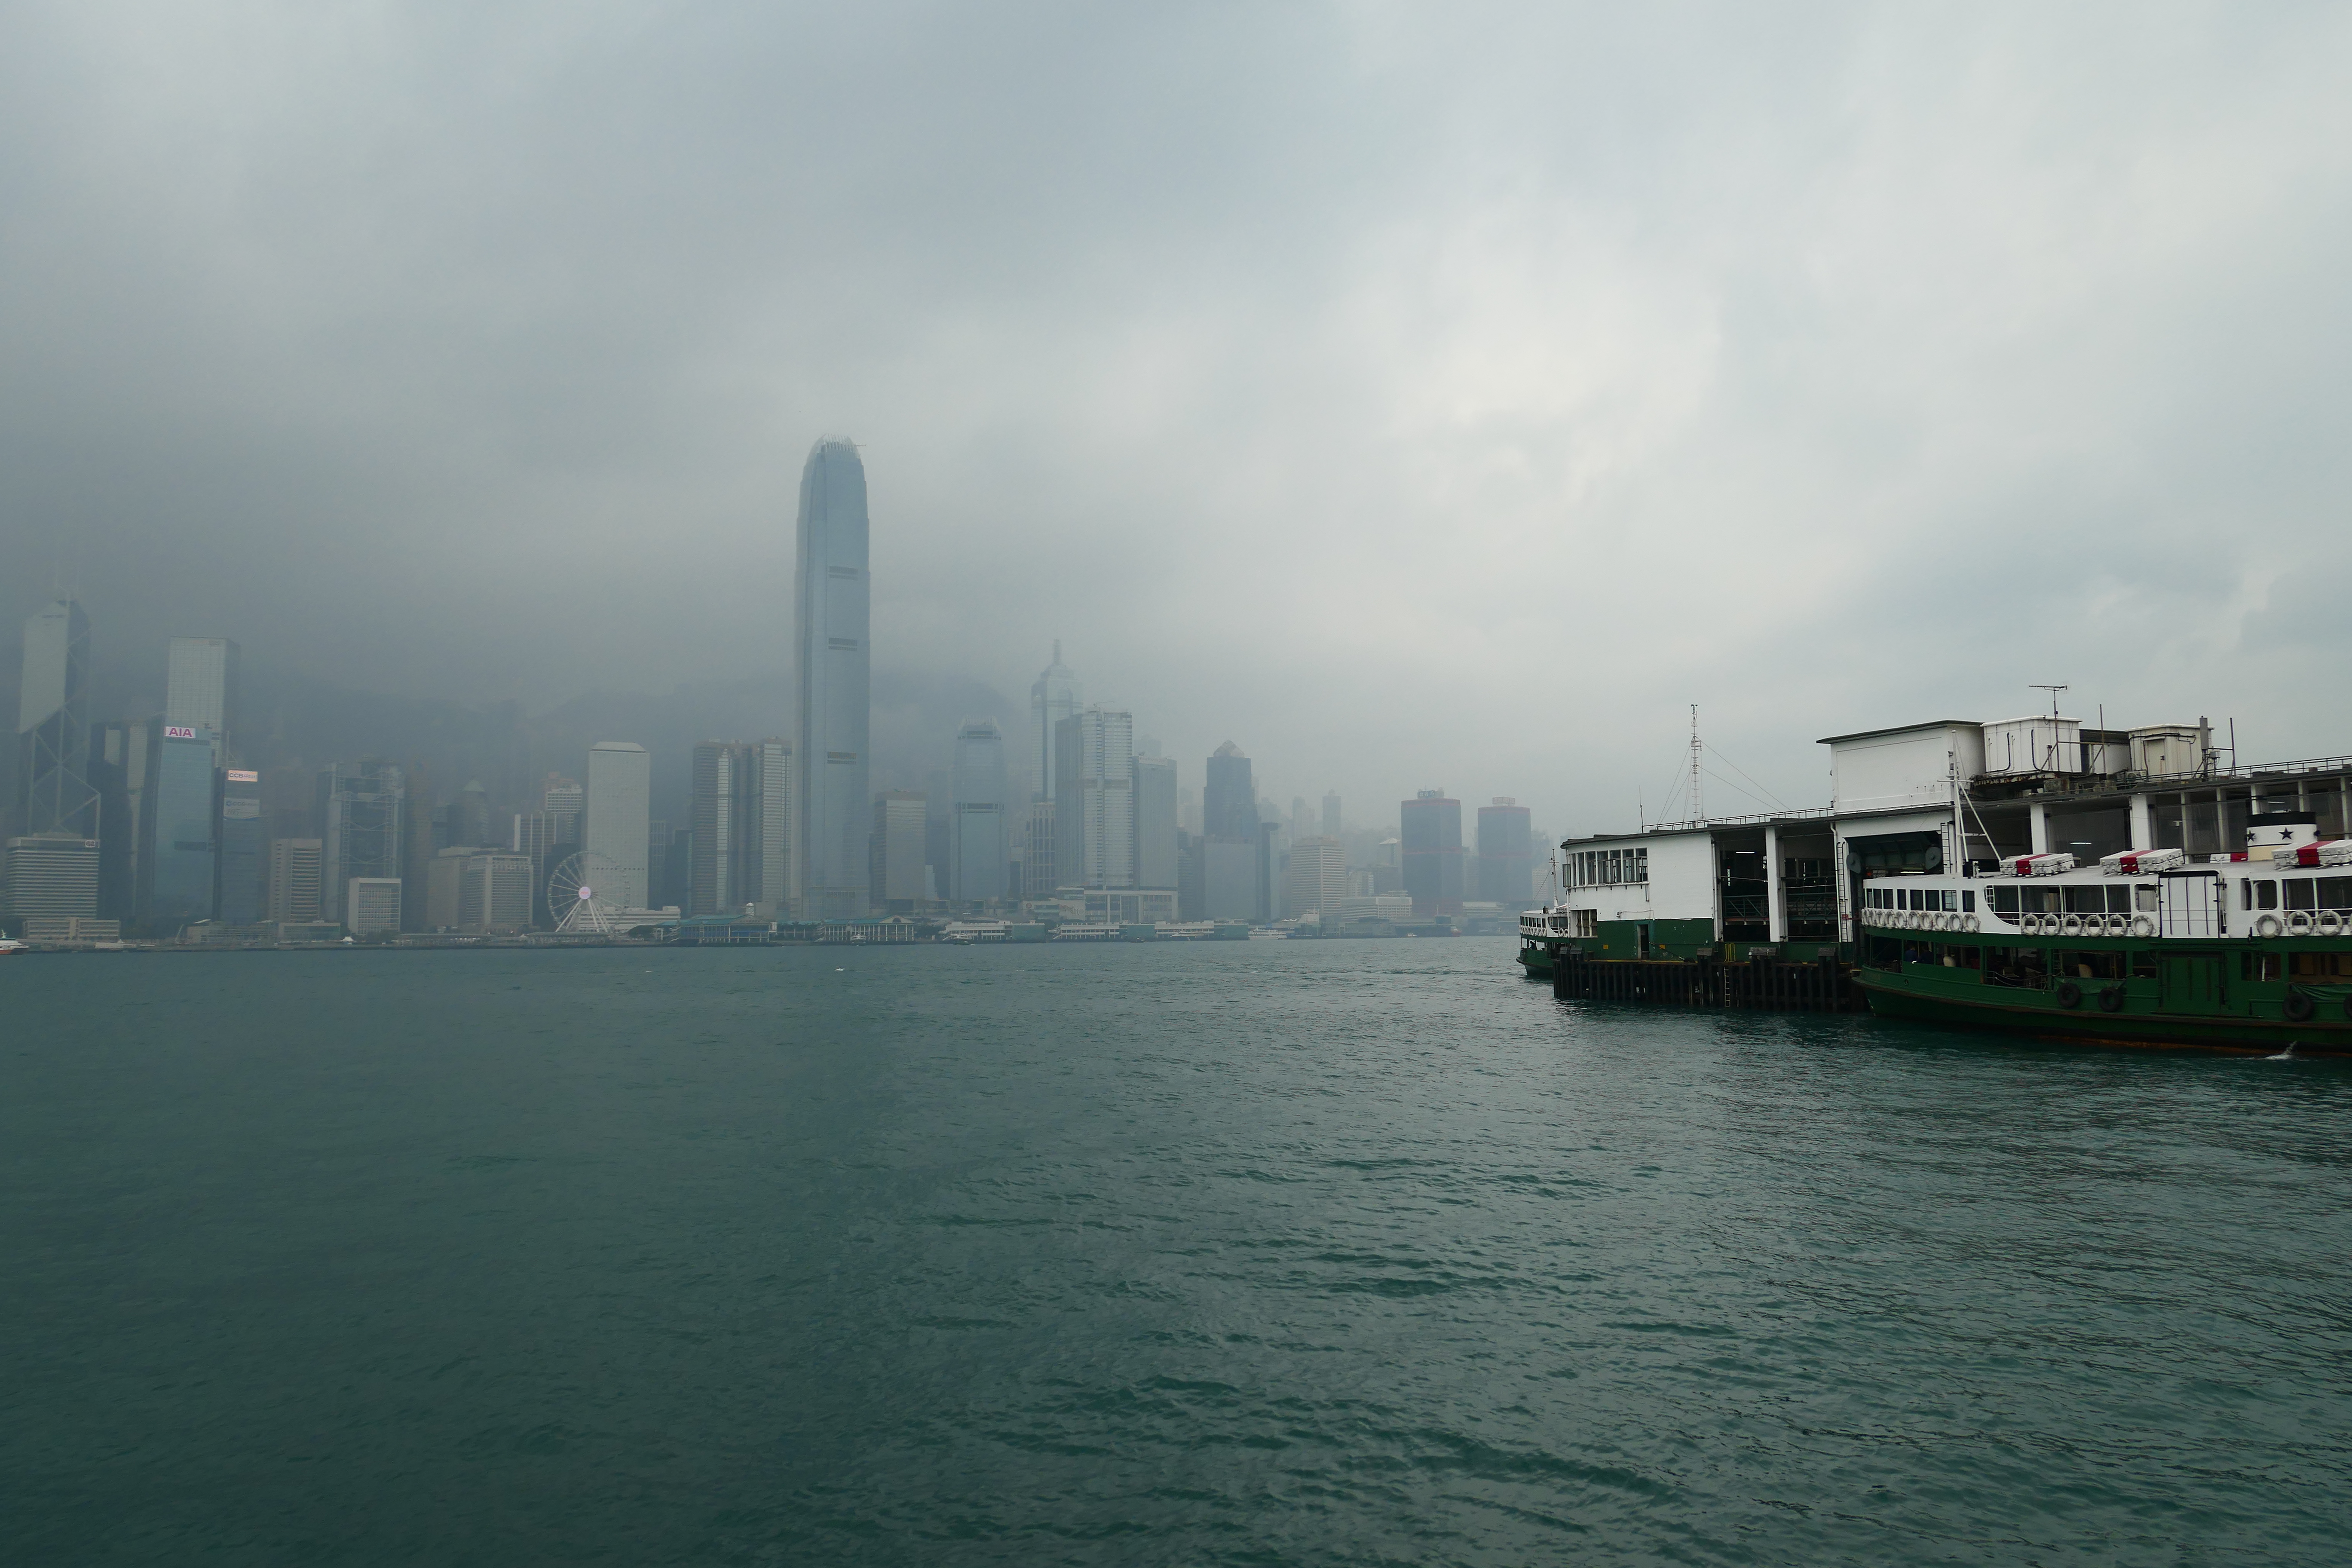 View of the Hong Kong skyline across Victoria Harbour